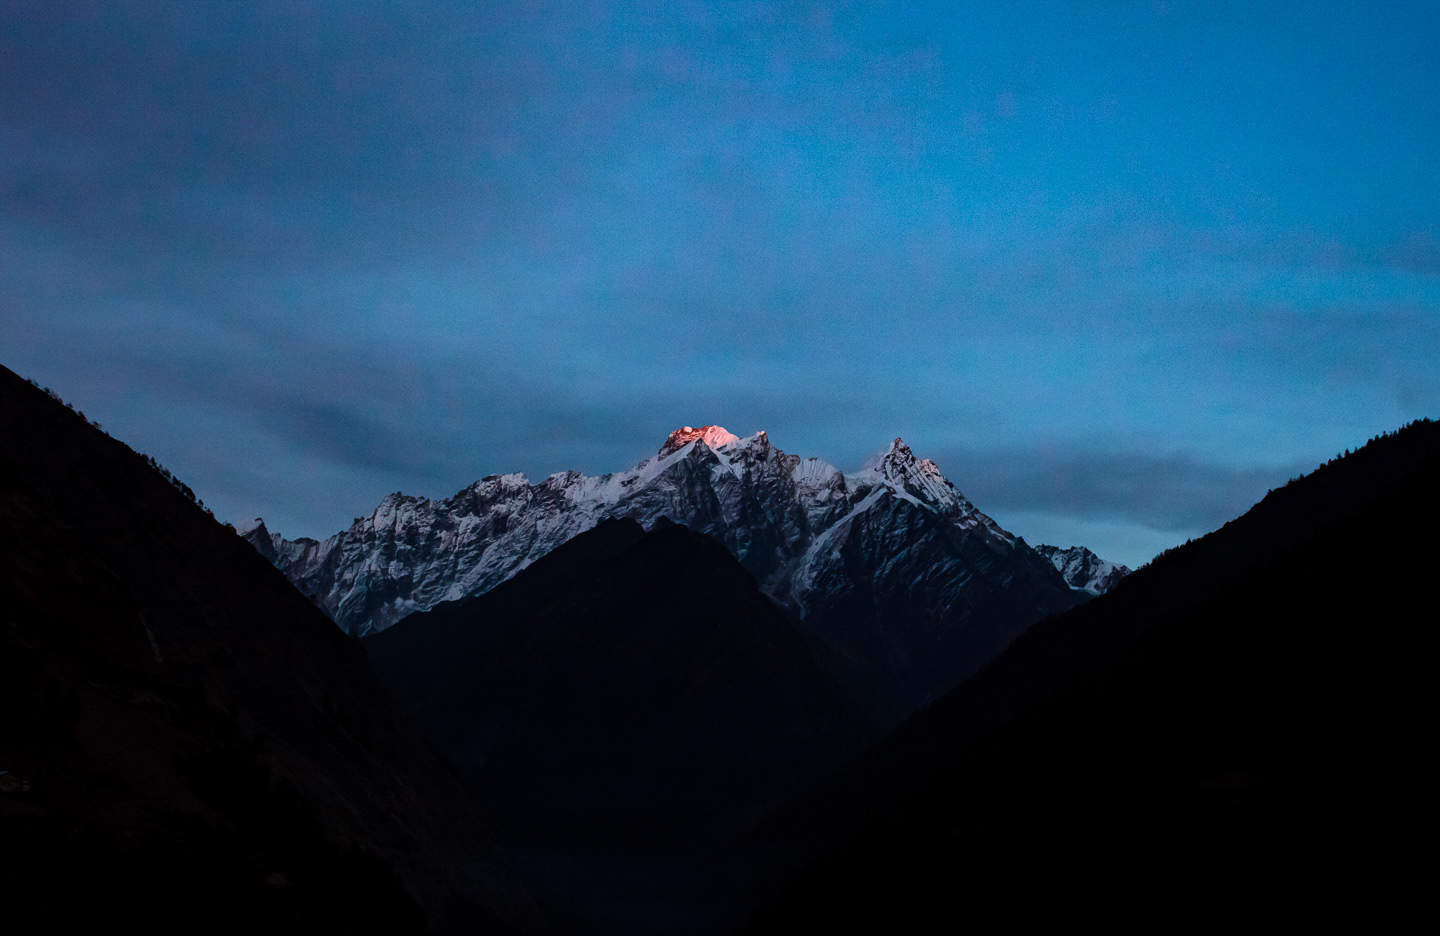 The last light at the tip of the Himalayan mountain in Manaslu, Nepal.